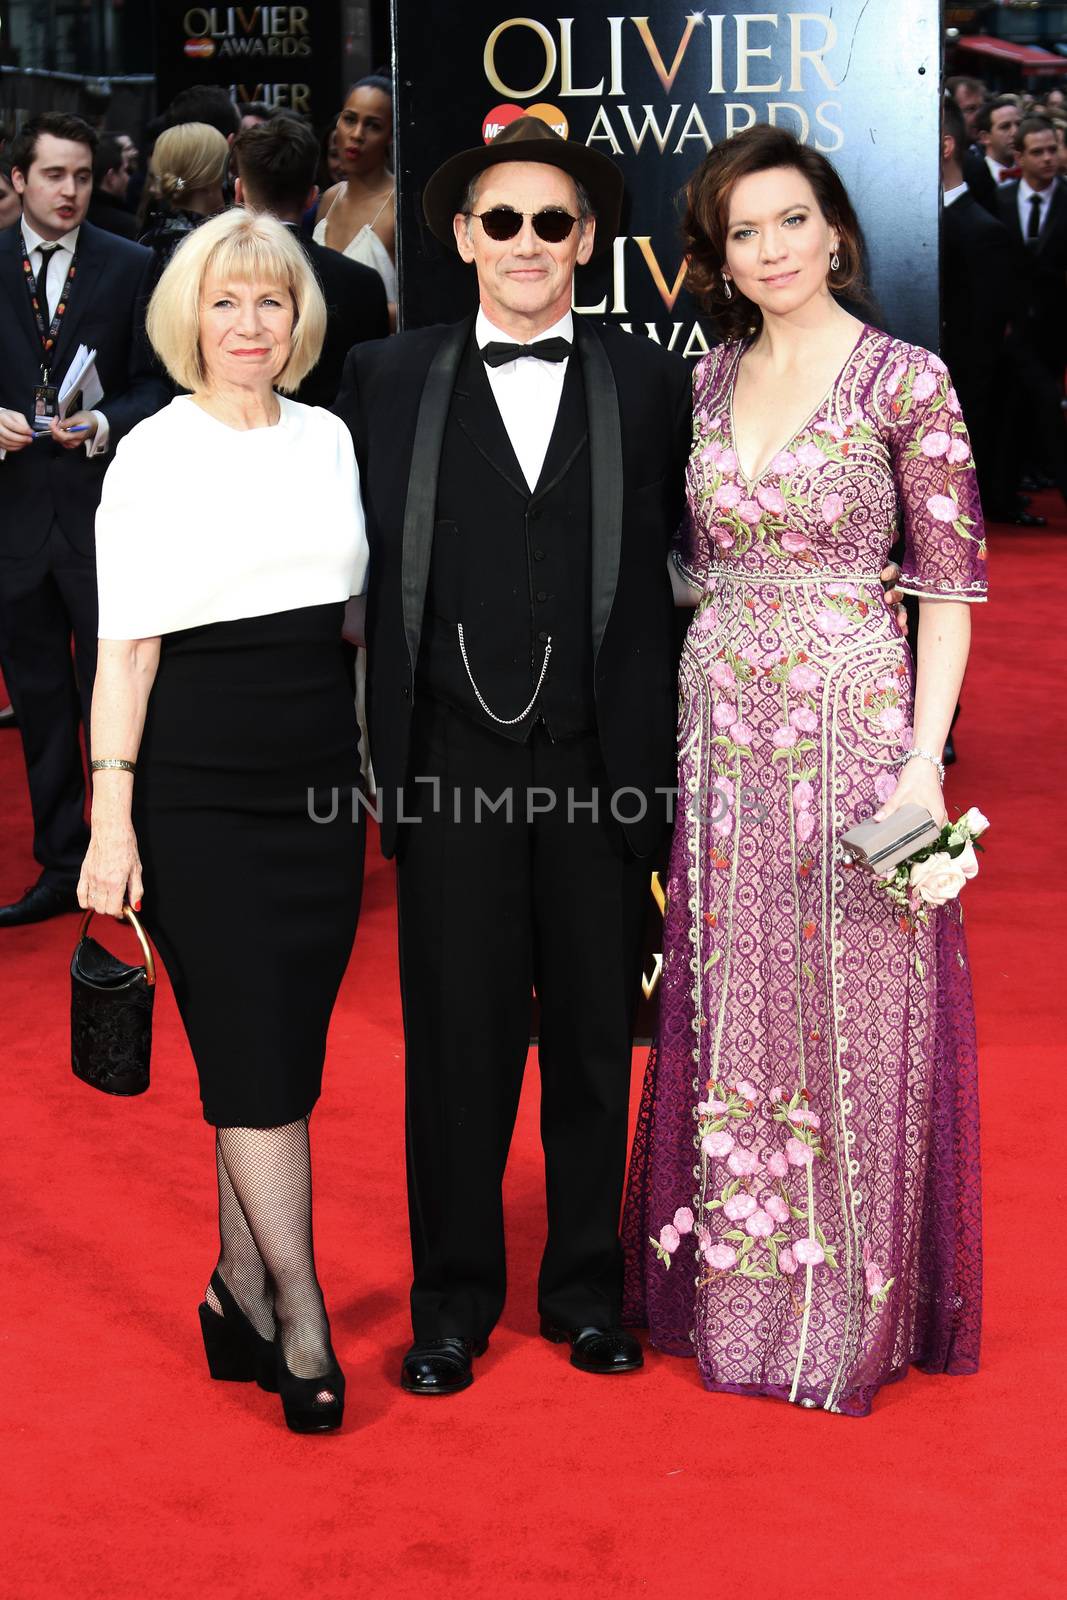 UK, London: Claire van Kampen, Mark Rylance, and Juliet Rylance hit the red carpet for the Olivier Awards at the Royal Opera House in London on April 3, 2016.